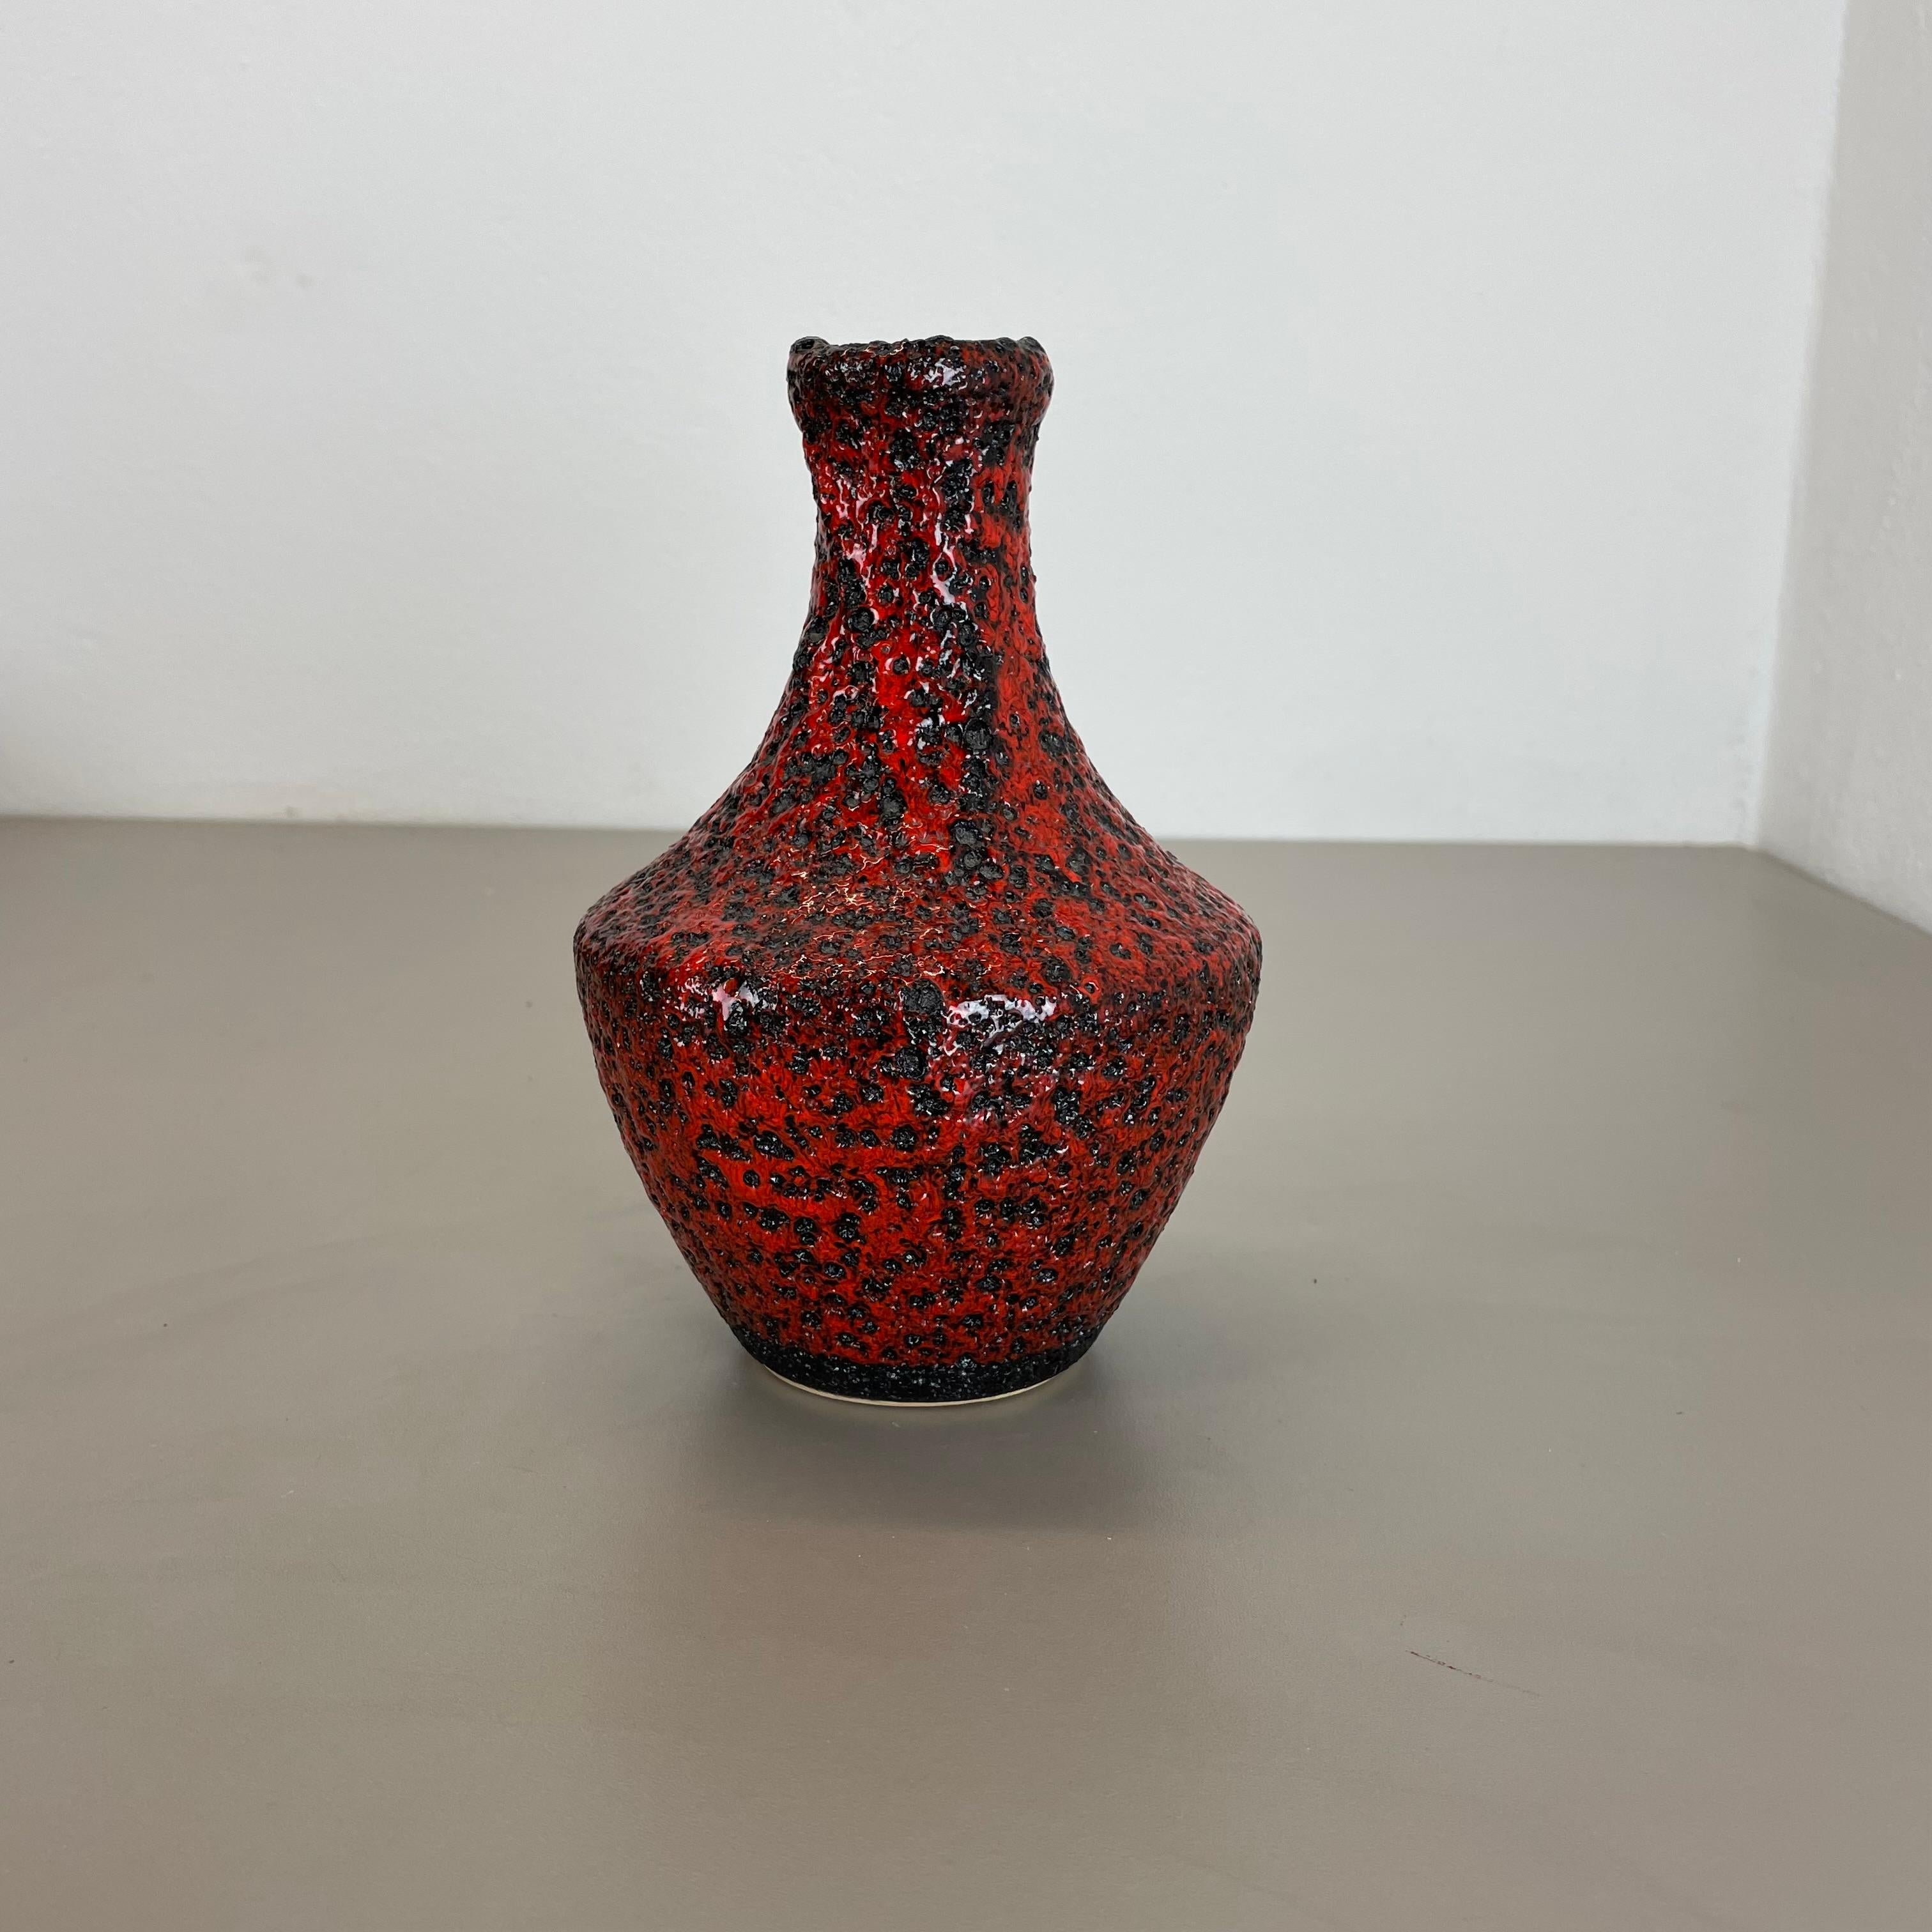 Article:

Pottery ceramic vase


Producer:

Silberdistel Ceramic, W. Germany


Decade:

1970s





Original vintage 1970s pottery ceramic vase made in Germany. High quality German production with a nice abstract super rare surface coloration in